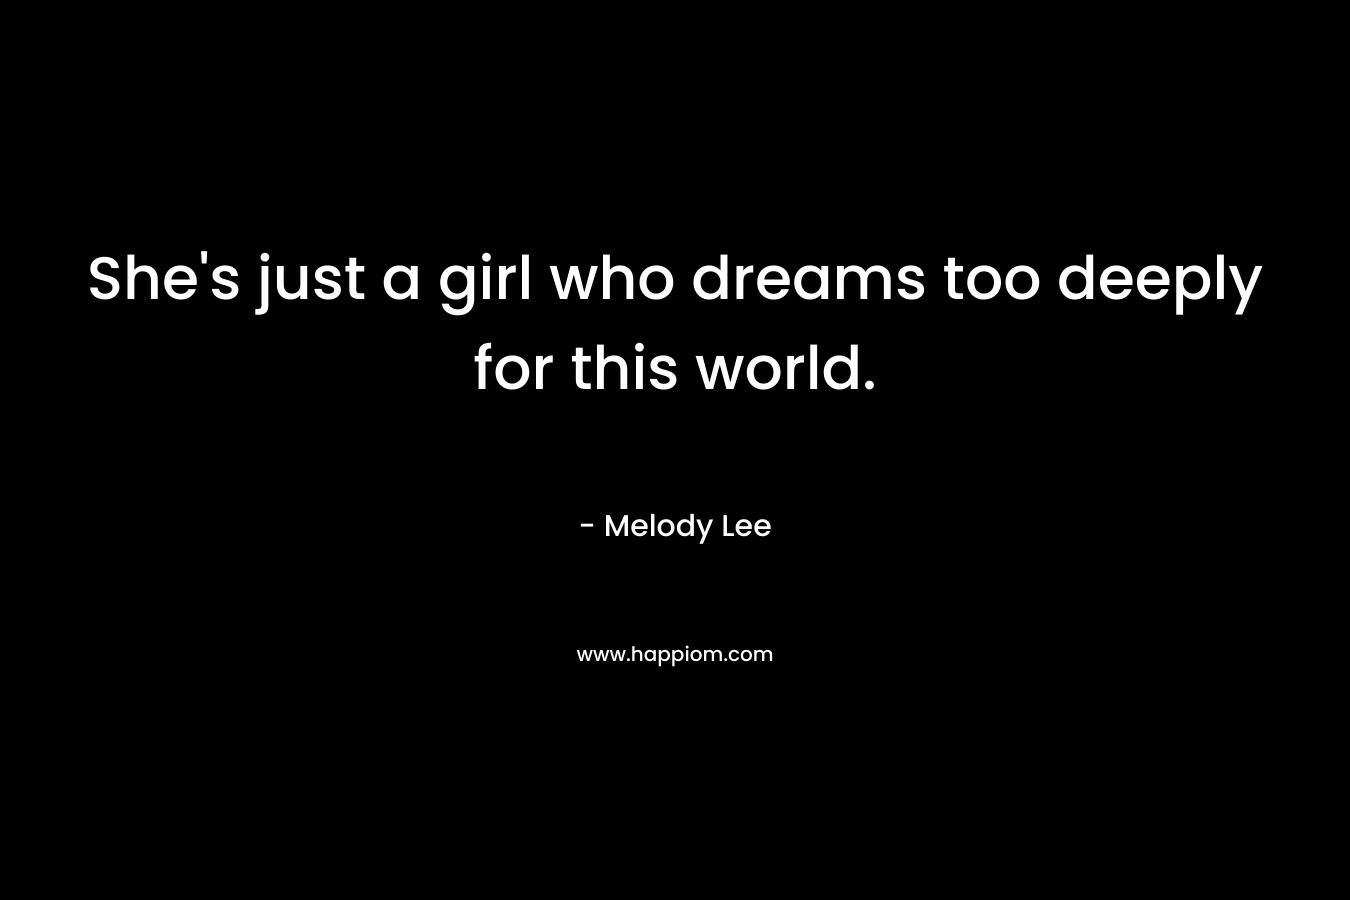 She's just a girl who dreams too deeply for this world.